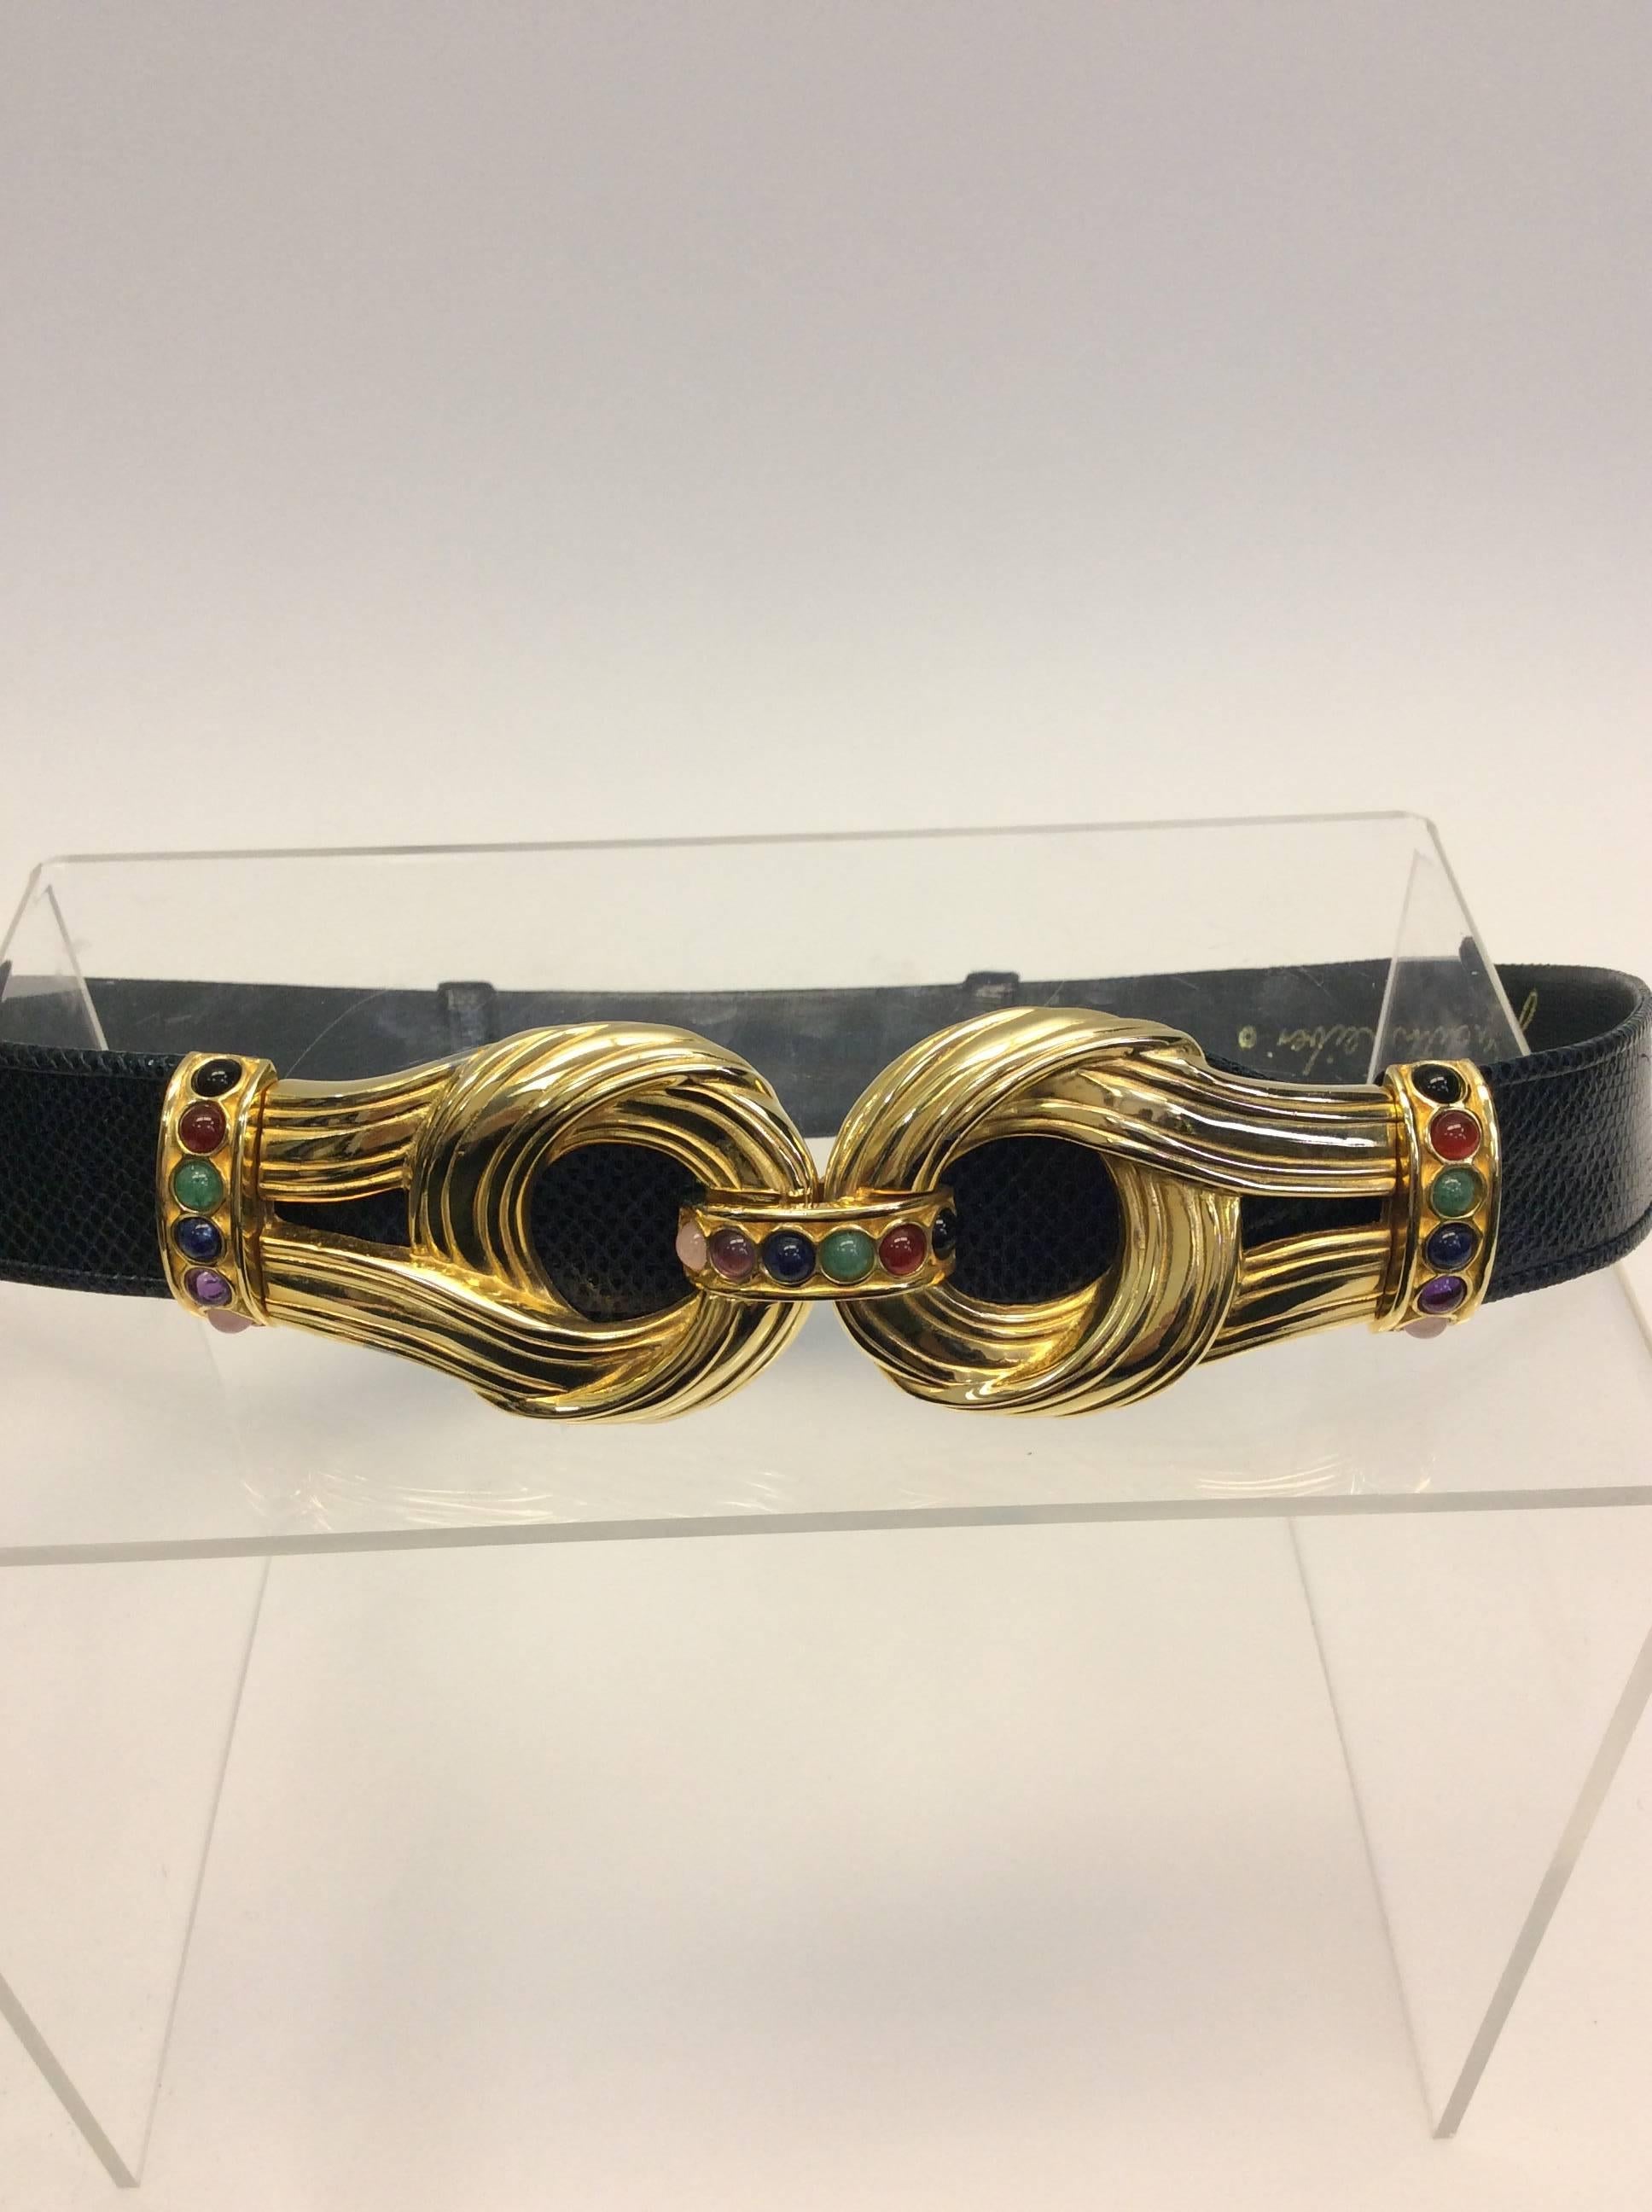 Judith Leiber Black Leather and Gold Multi-Color Stone Belt
Leather
36